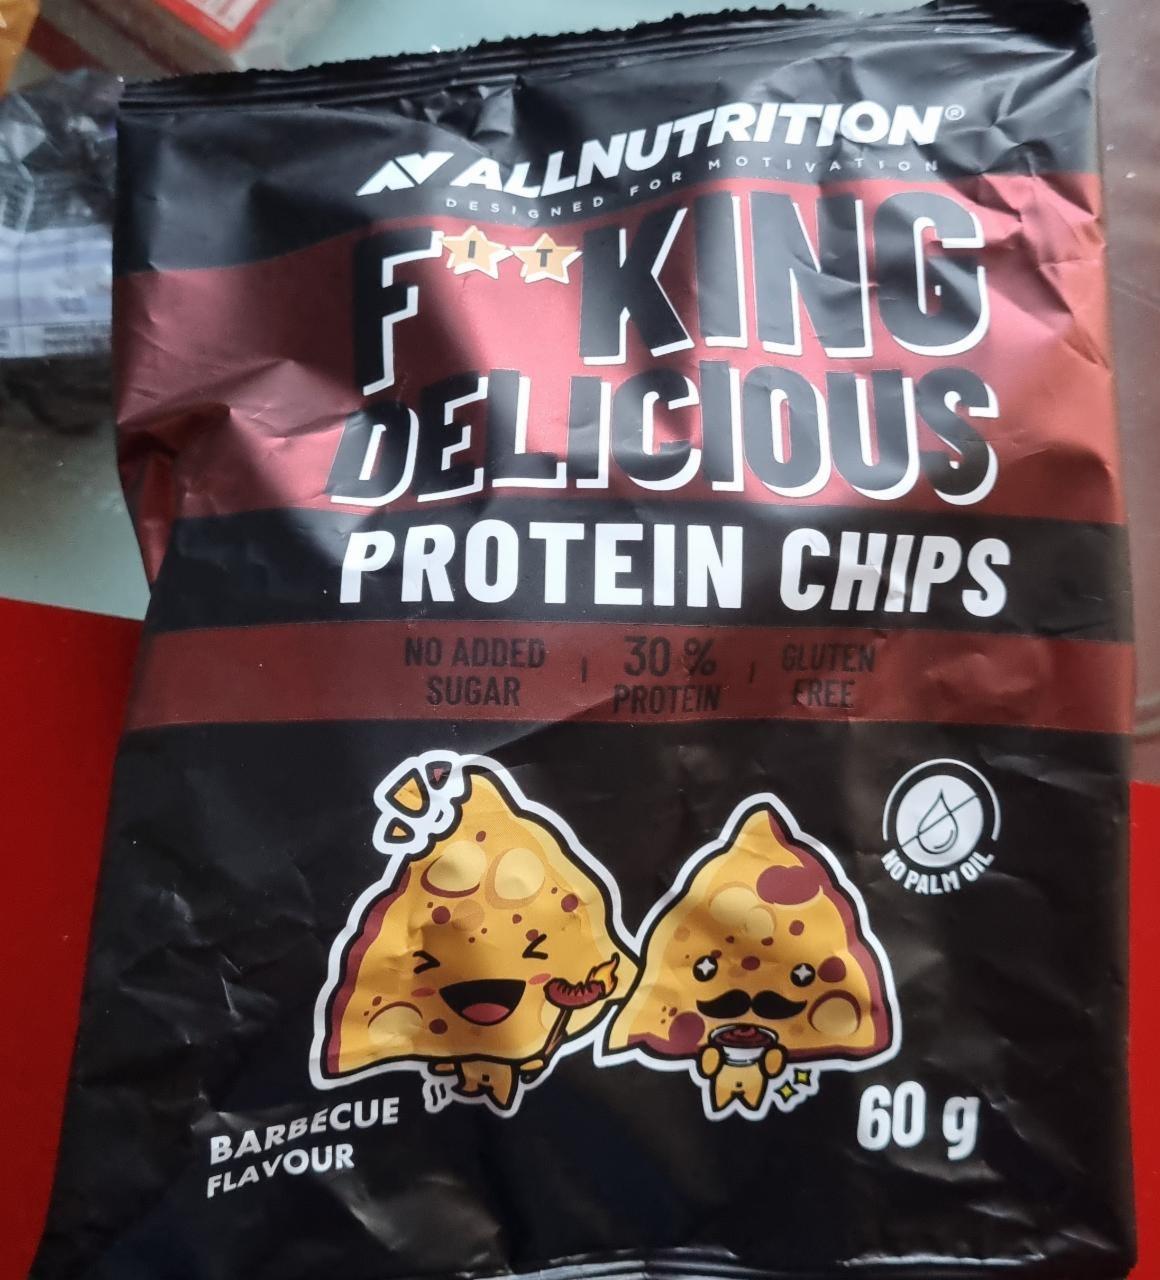 Fotografie - Fitking Delicious Protein Chips Barbecue Allnutrition